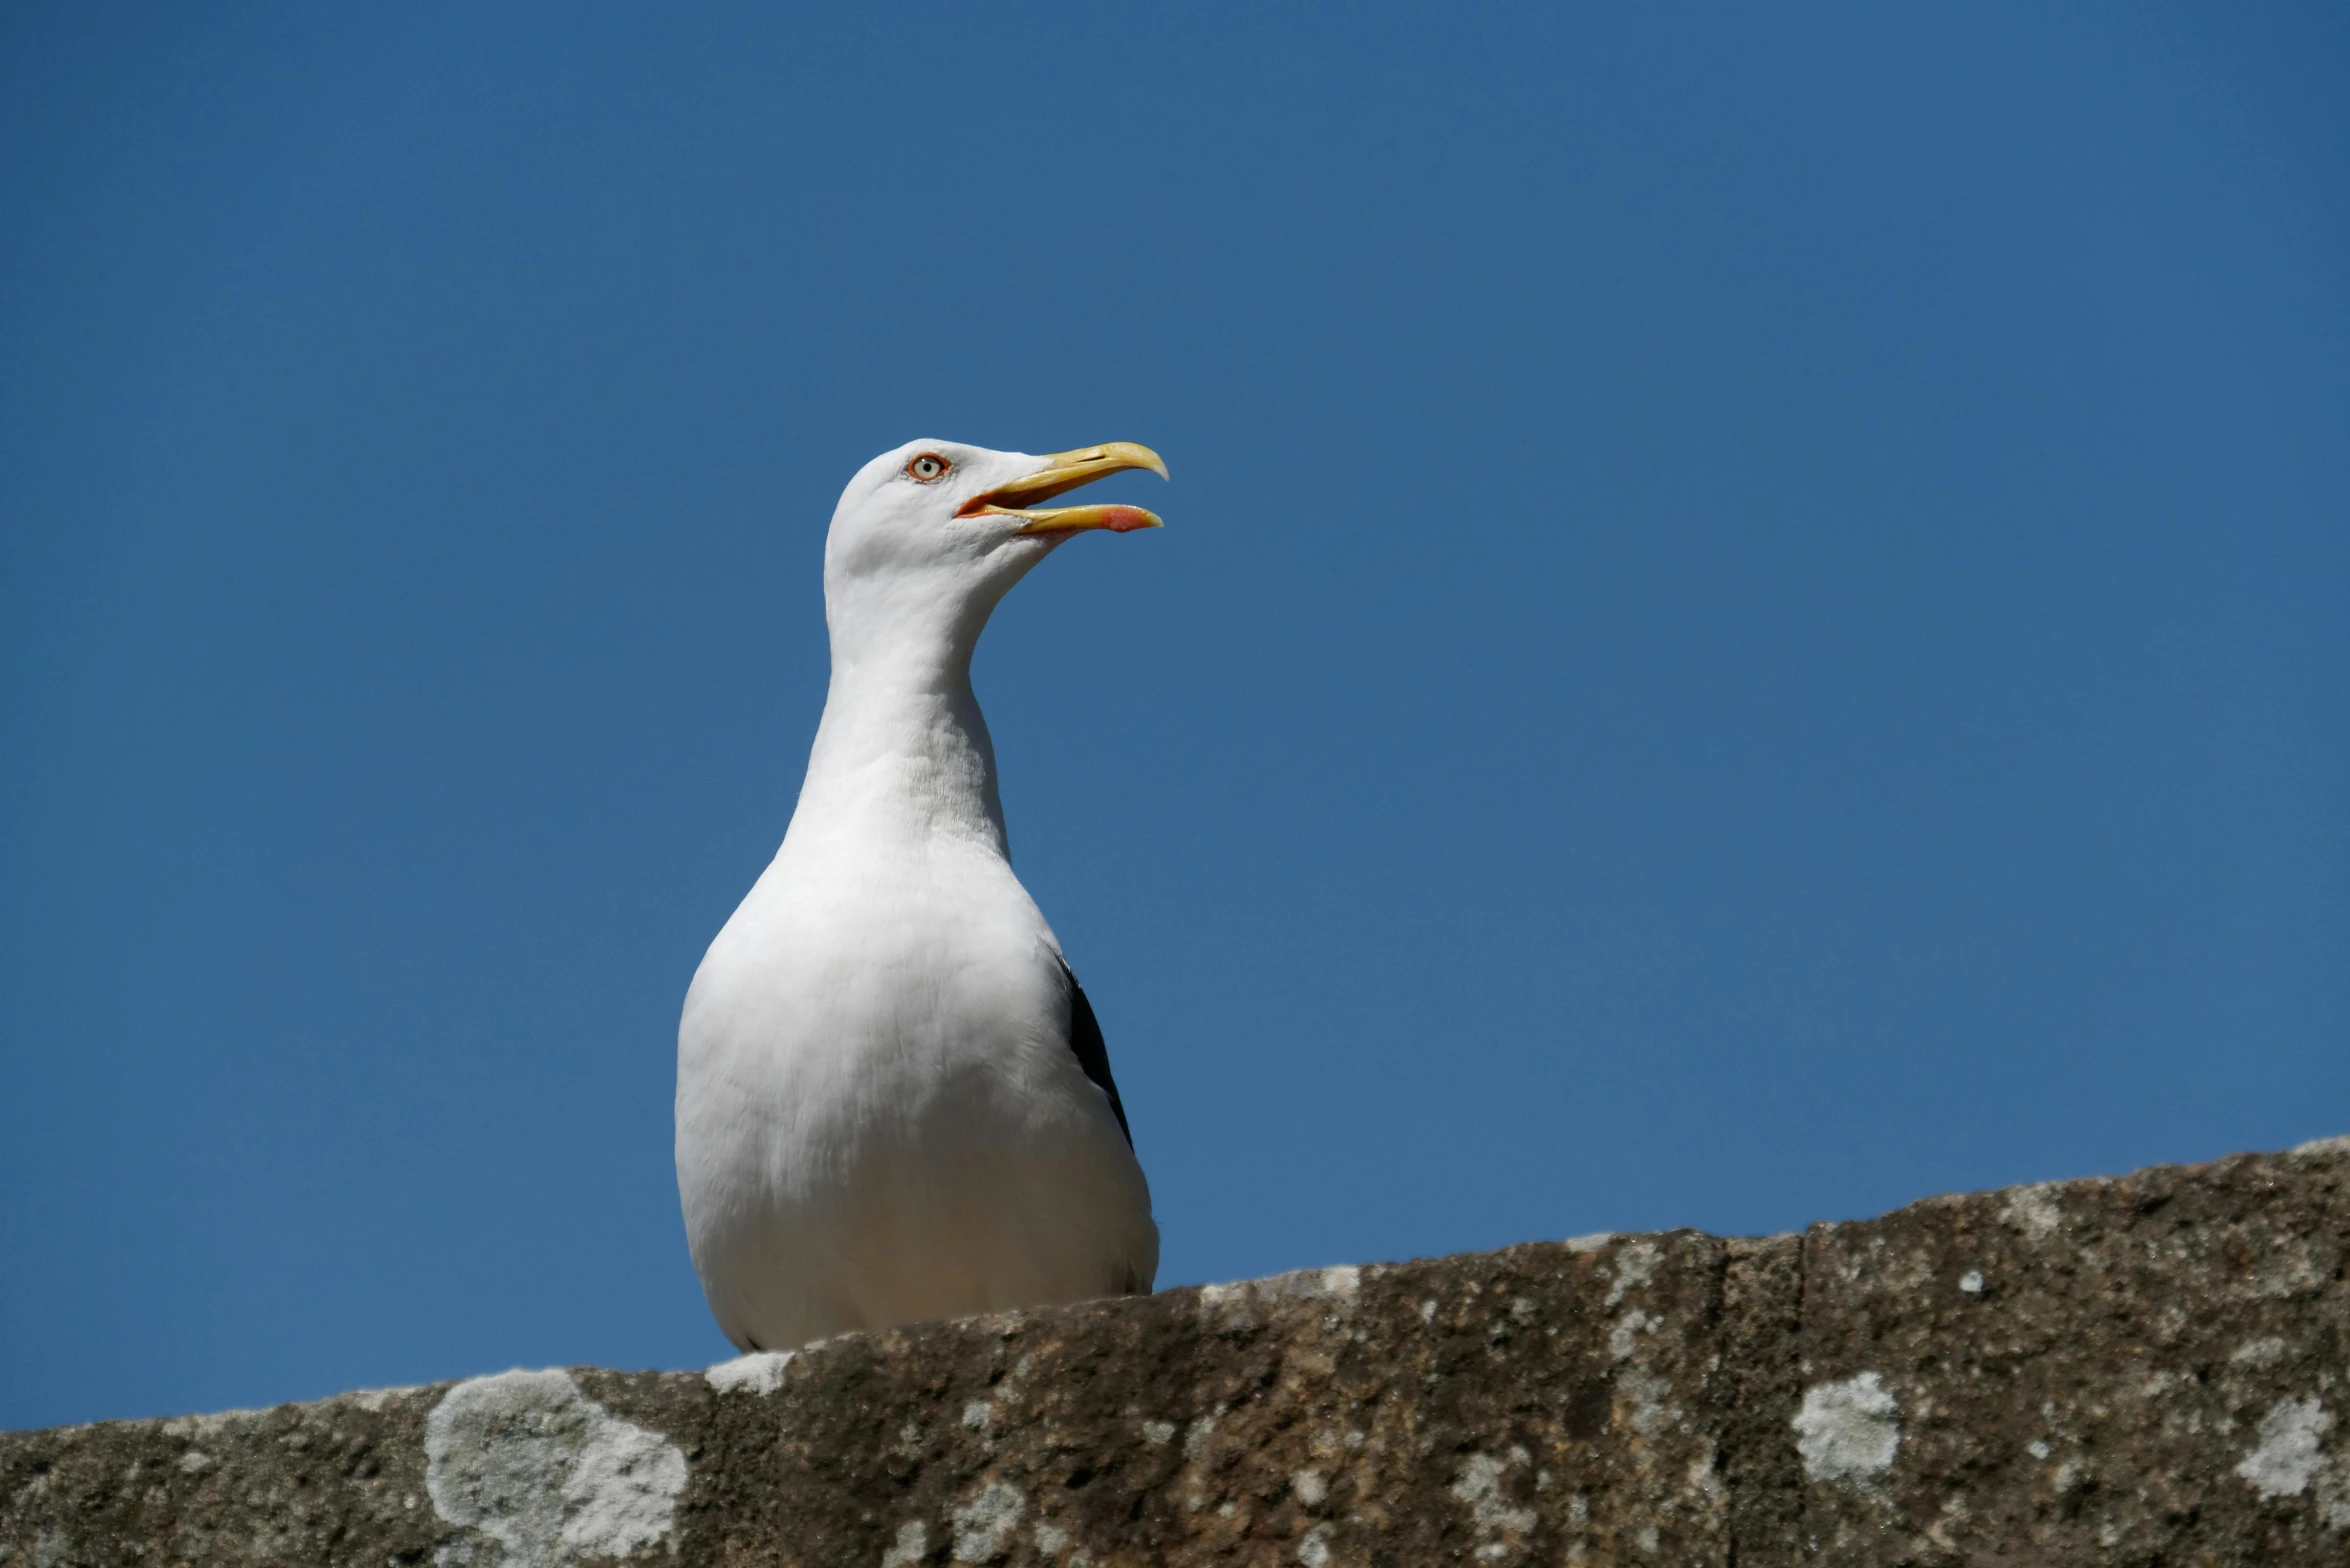 seagull standing on top of concrete wall under blue sky